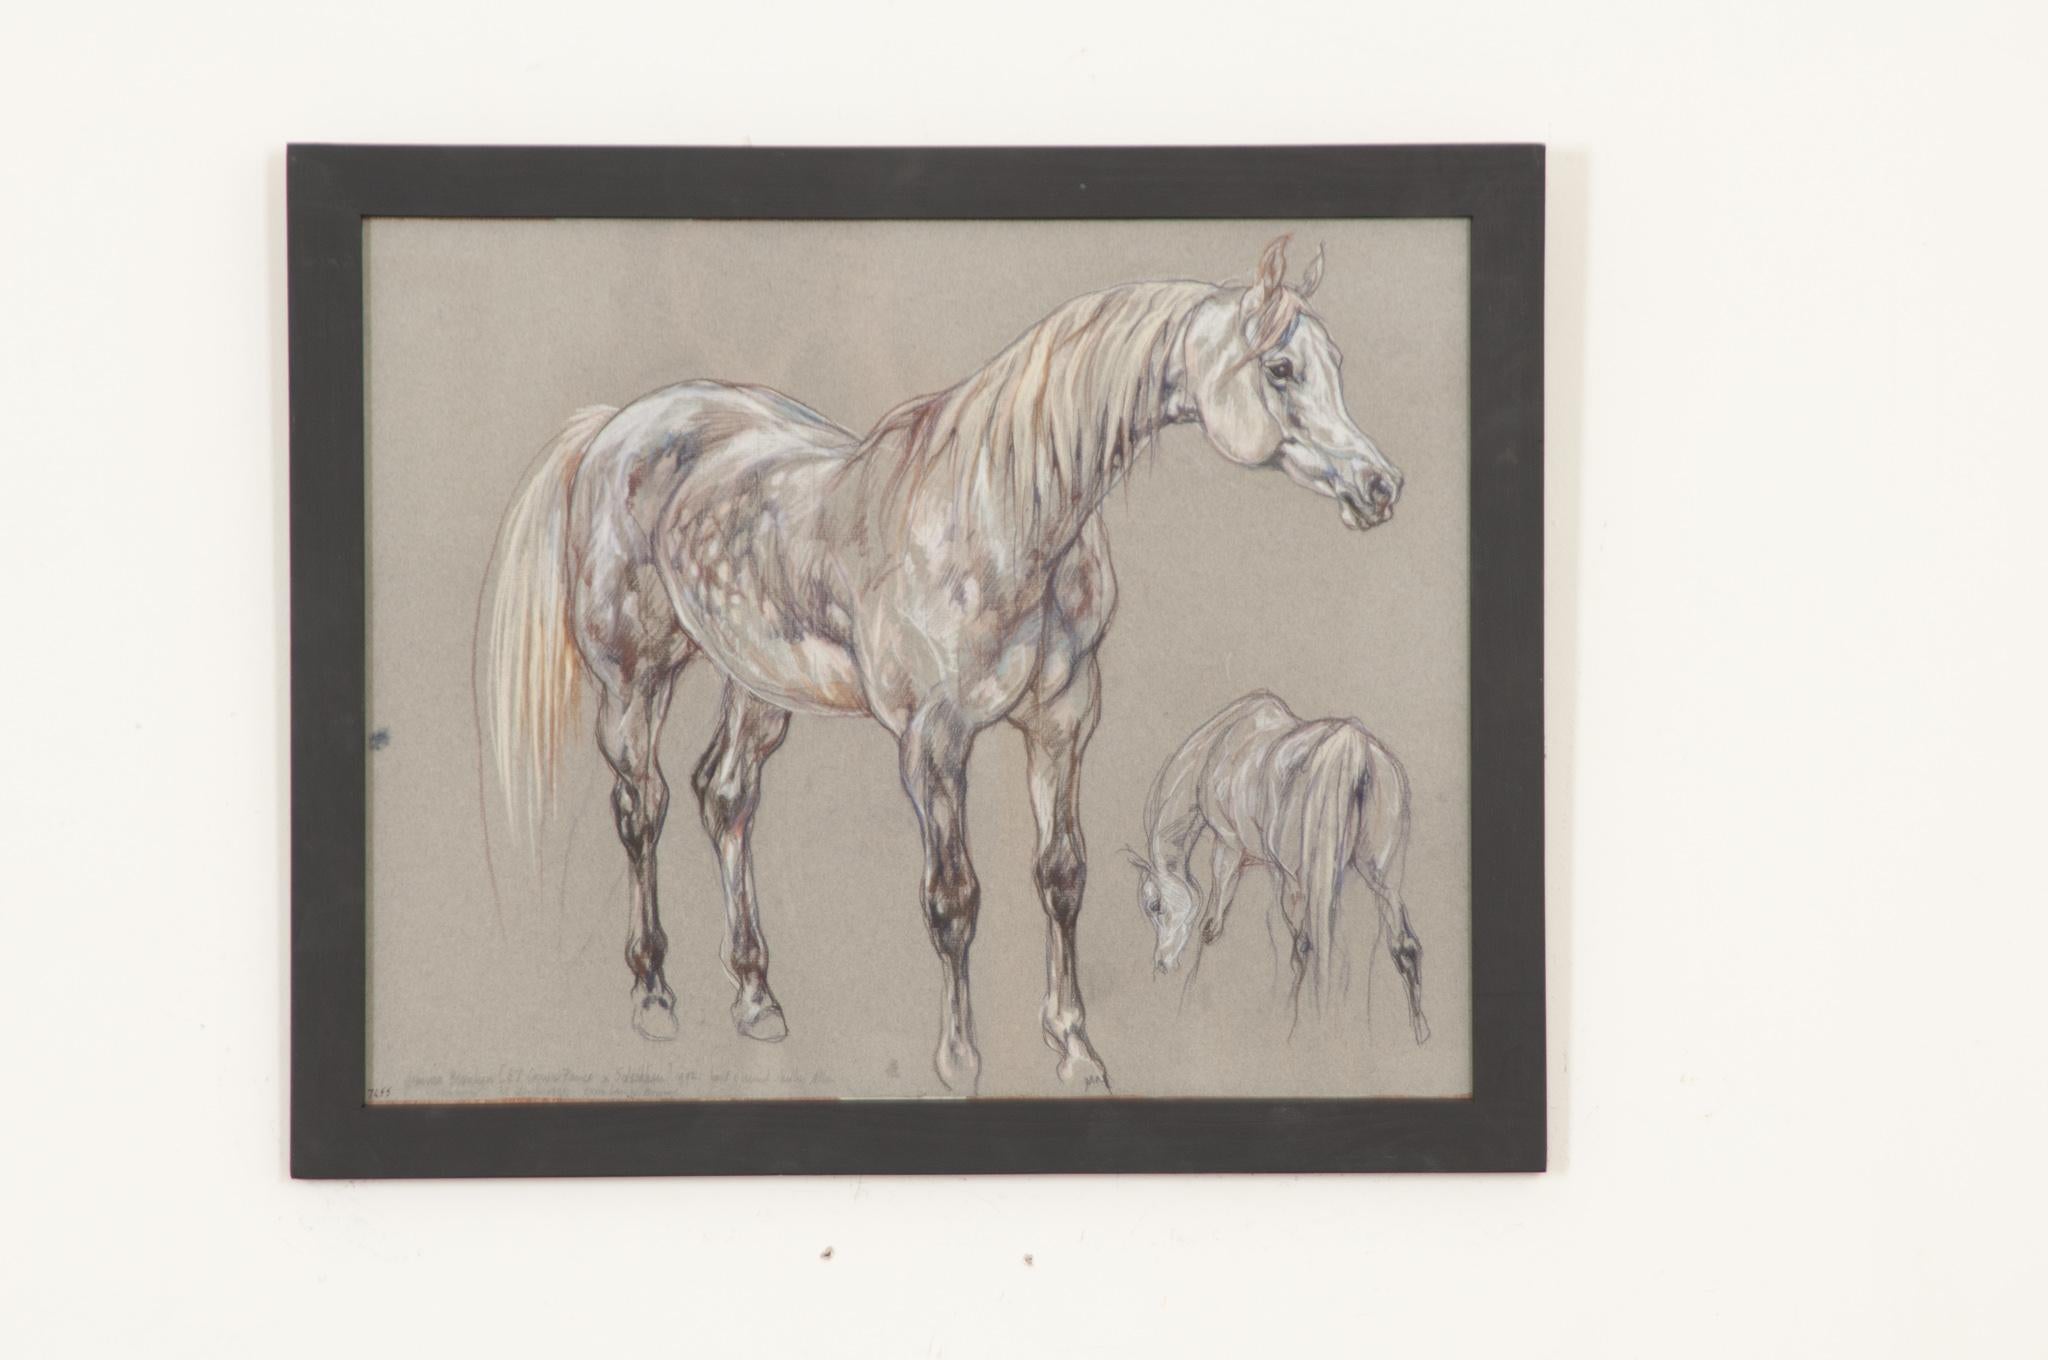 A beautiful piece from a larger collection of framed 20th century show horse drawings by Royal Academy artist Leslie Charlotte Benenson (1941-2018). A pastel study of exceptional quality on charcoal paper. Notes from the artist are at the bottom of